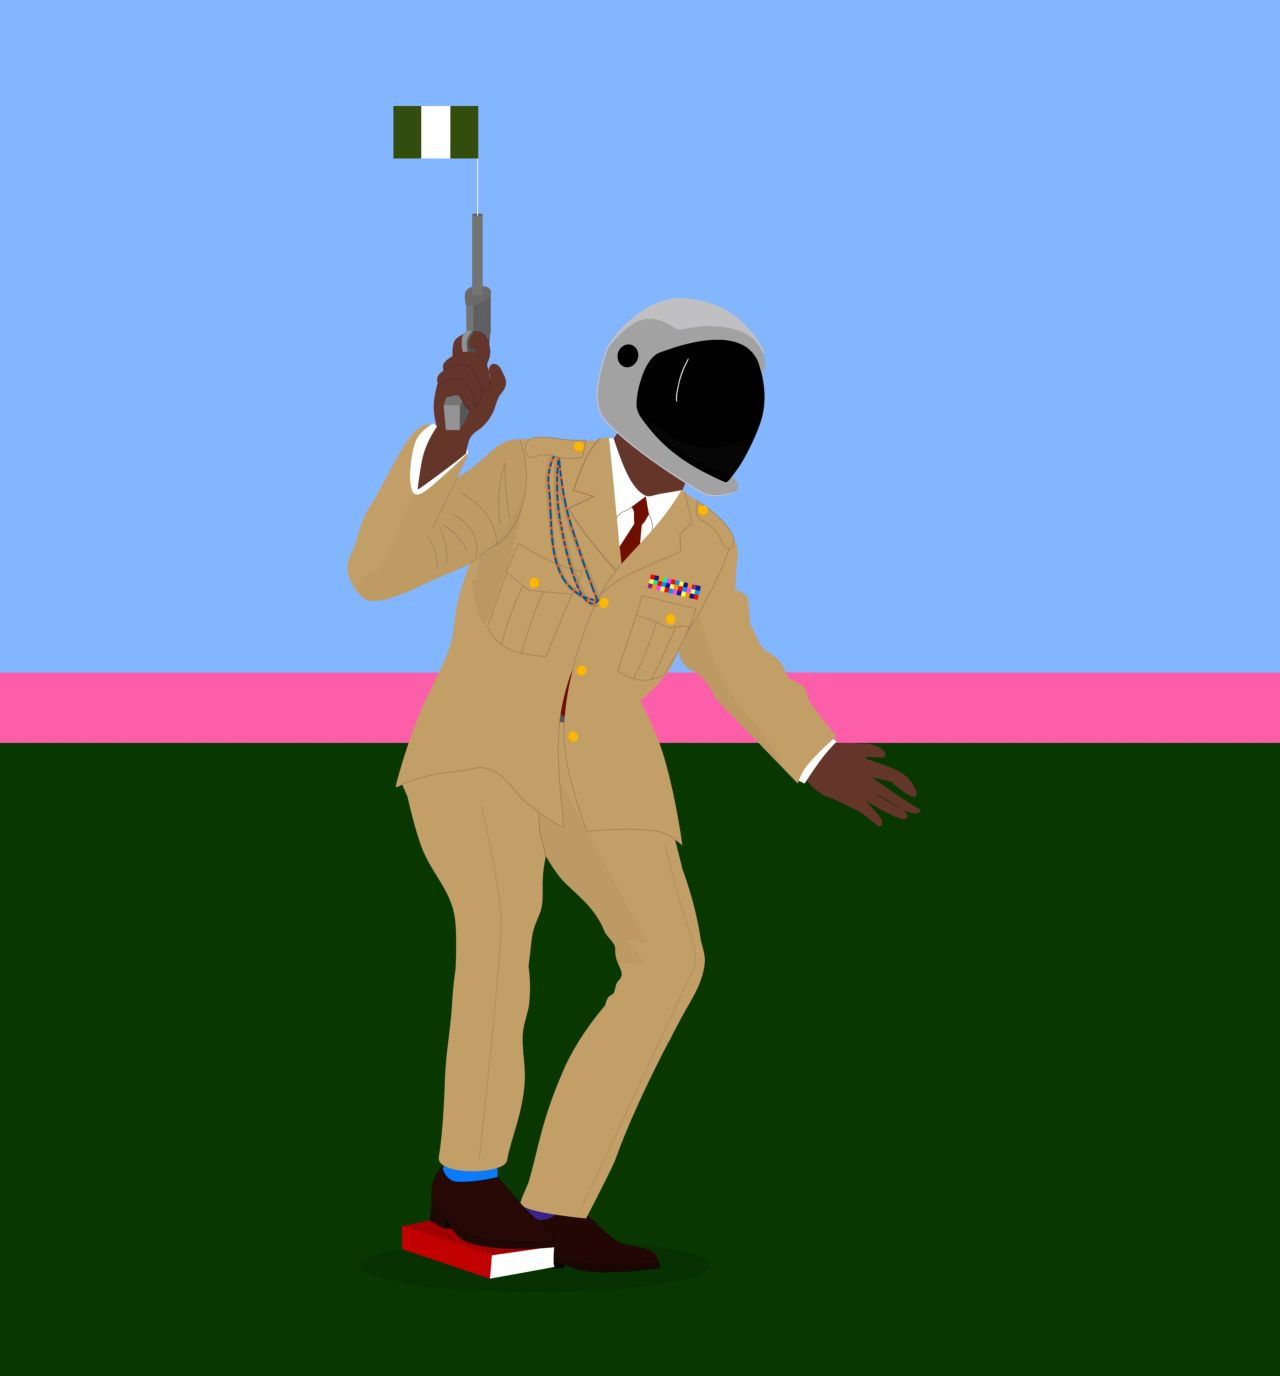 Osadebe painted "General (shoots a fake gun)" in 2019. He said the tiny Nigerian flag emerging from the barrel of the gun reflects military leaders' lack of progress on taking the country to new heights. "For the leaders, the priority has never been to empower the people," he said, adding that the book beneath the figure's foot symbolizes education taking the last priority.